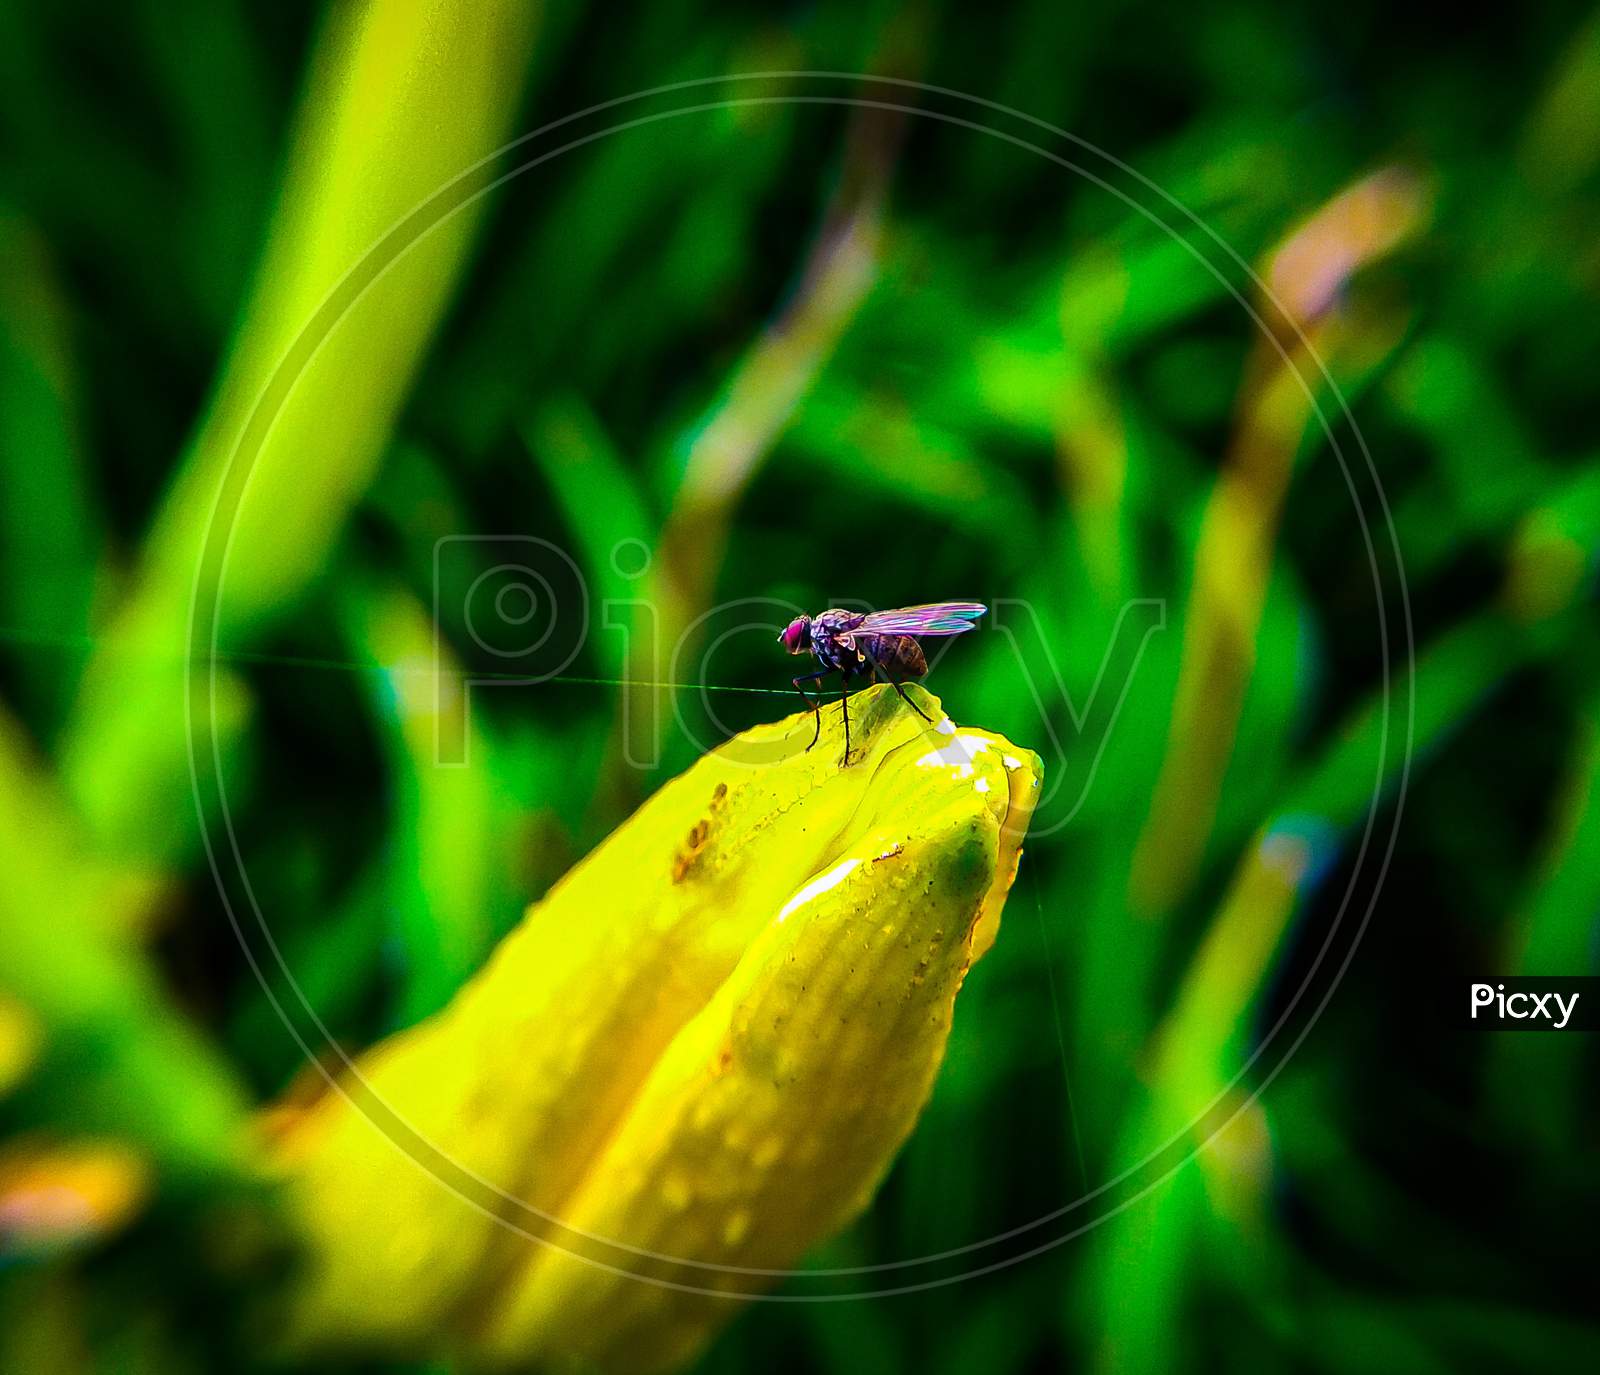 A macro shot of a fly sitting on the bud of a flower